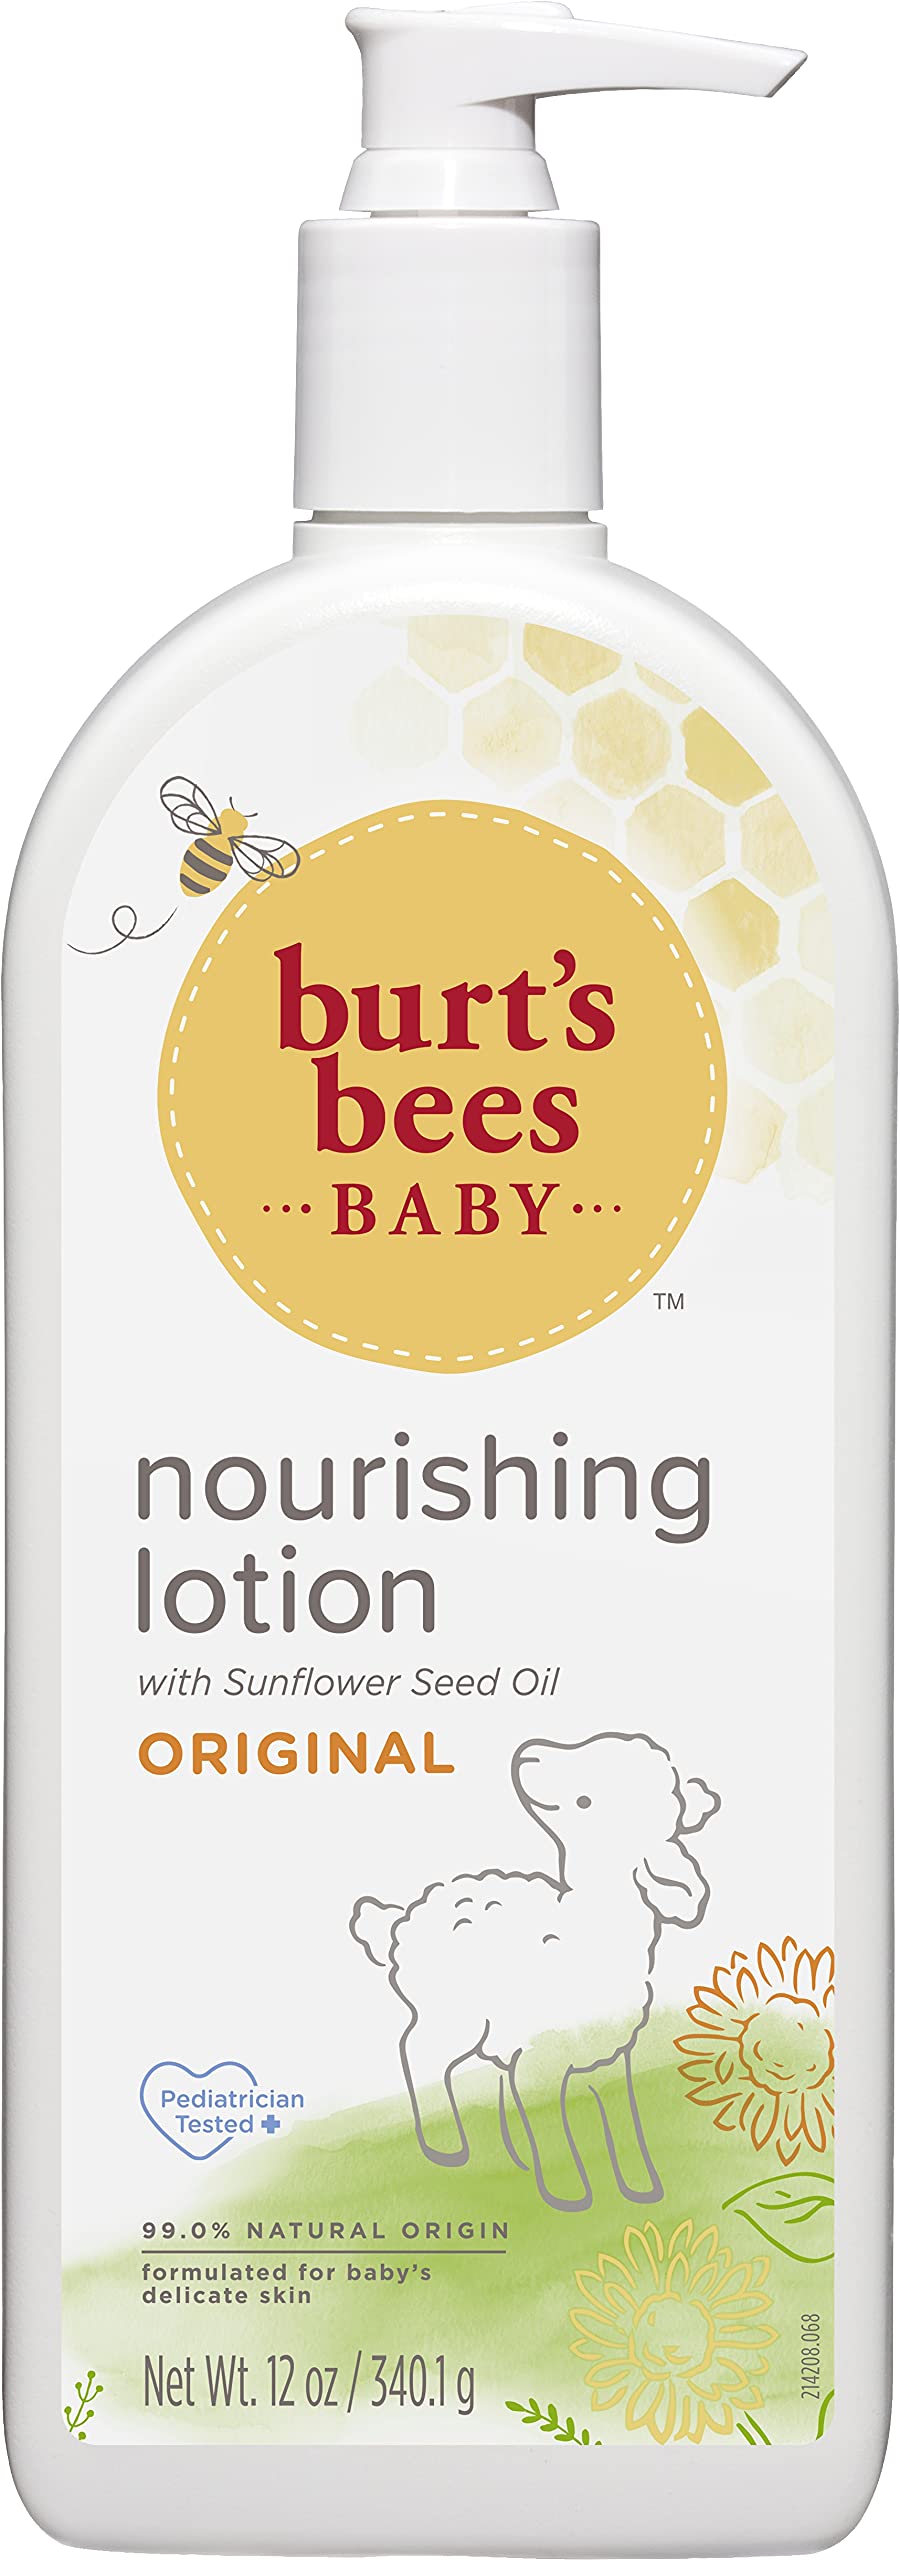 Burt's Bees Baby Lotion for Sensitive Skin, Nourishing Baby Care, Non-Irritating, Original Scent, 12 Ounce